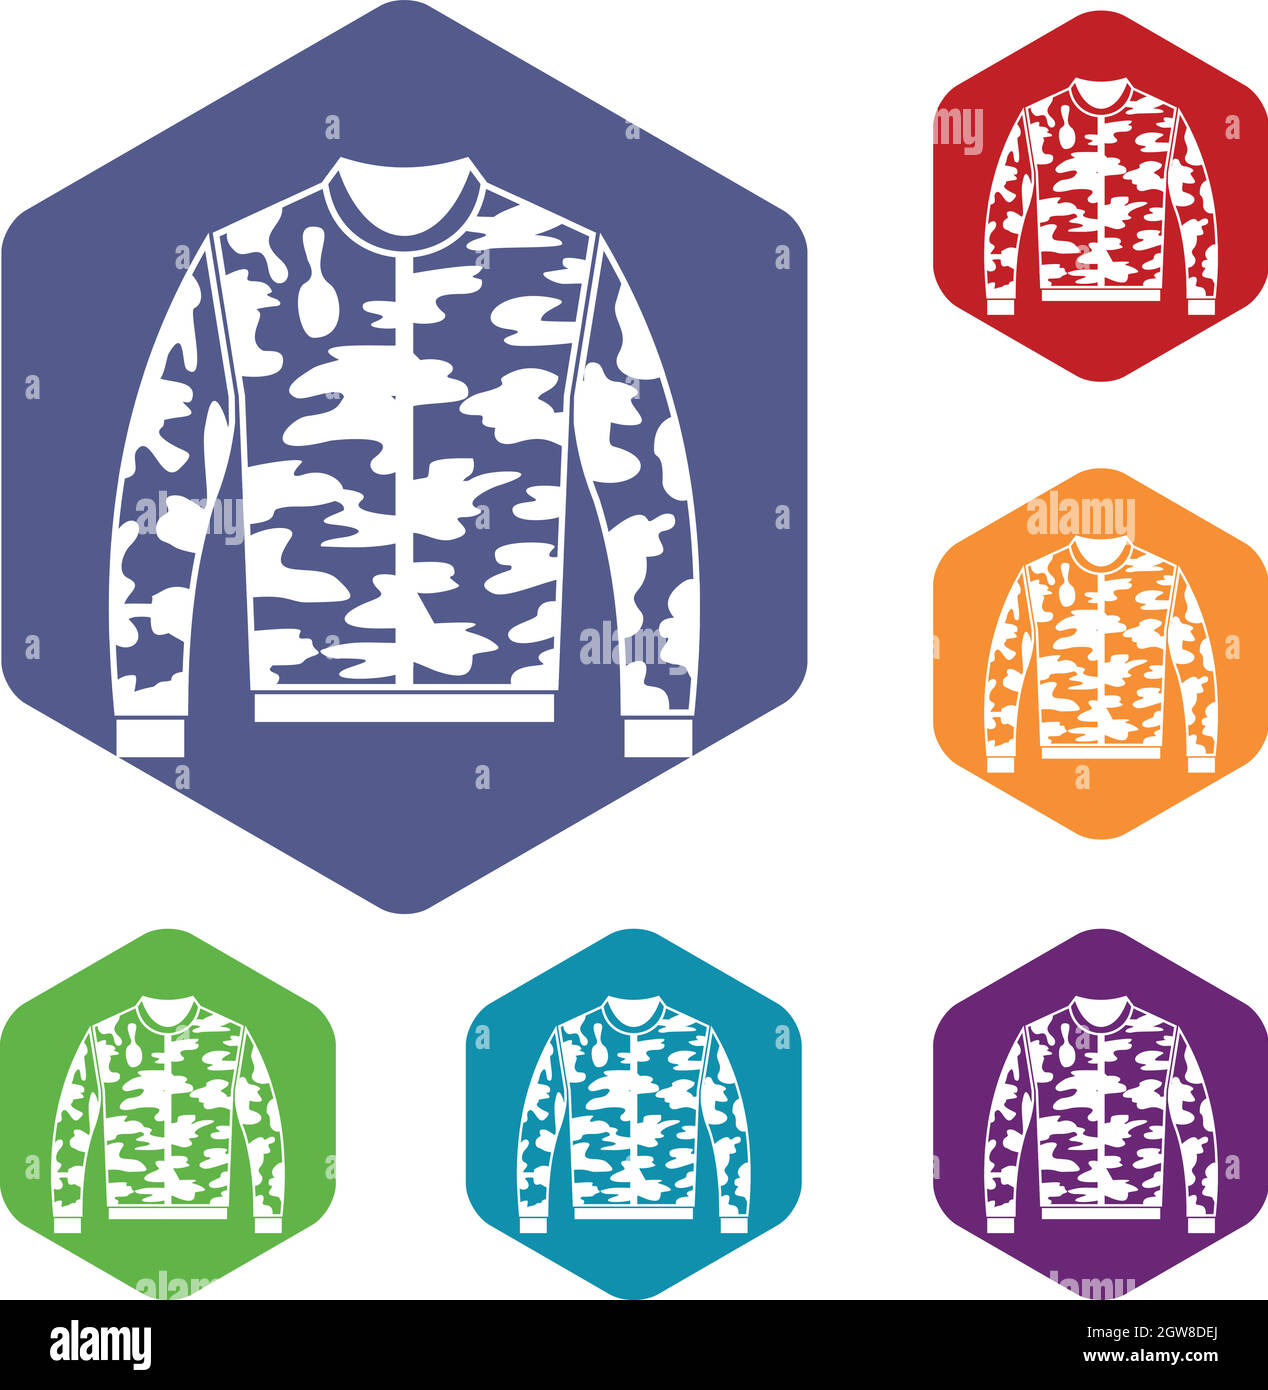 Camouflage jacket icons set Stock Vector